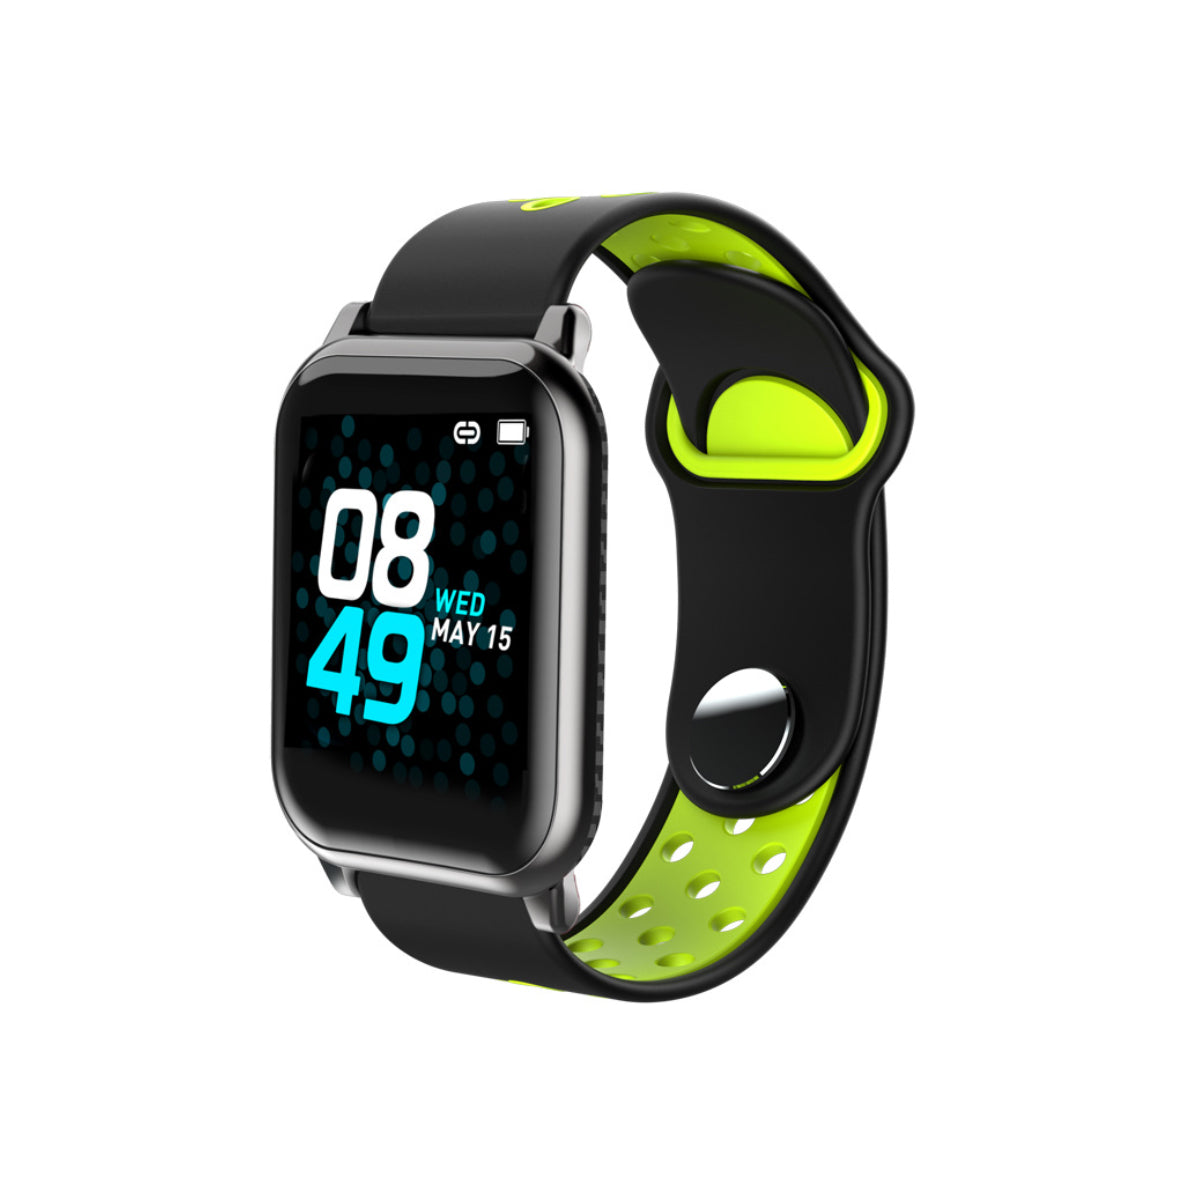 Jog And Log A Smart Watch With Wellness And Activity Tracker by VistaShops